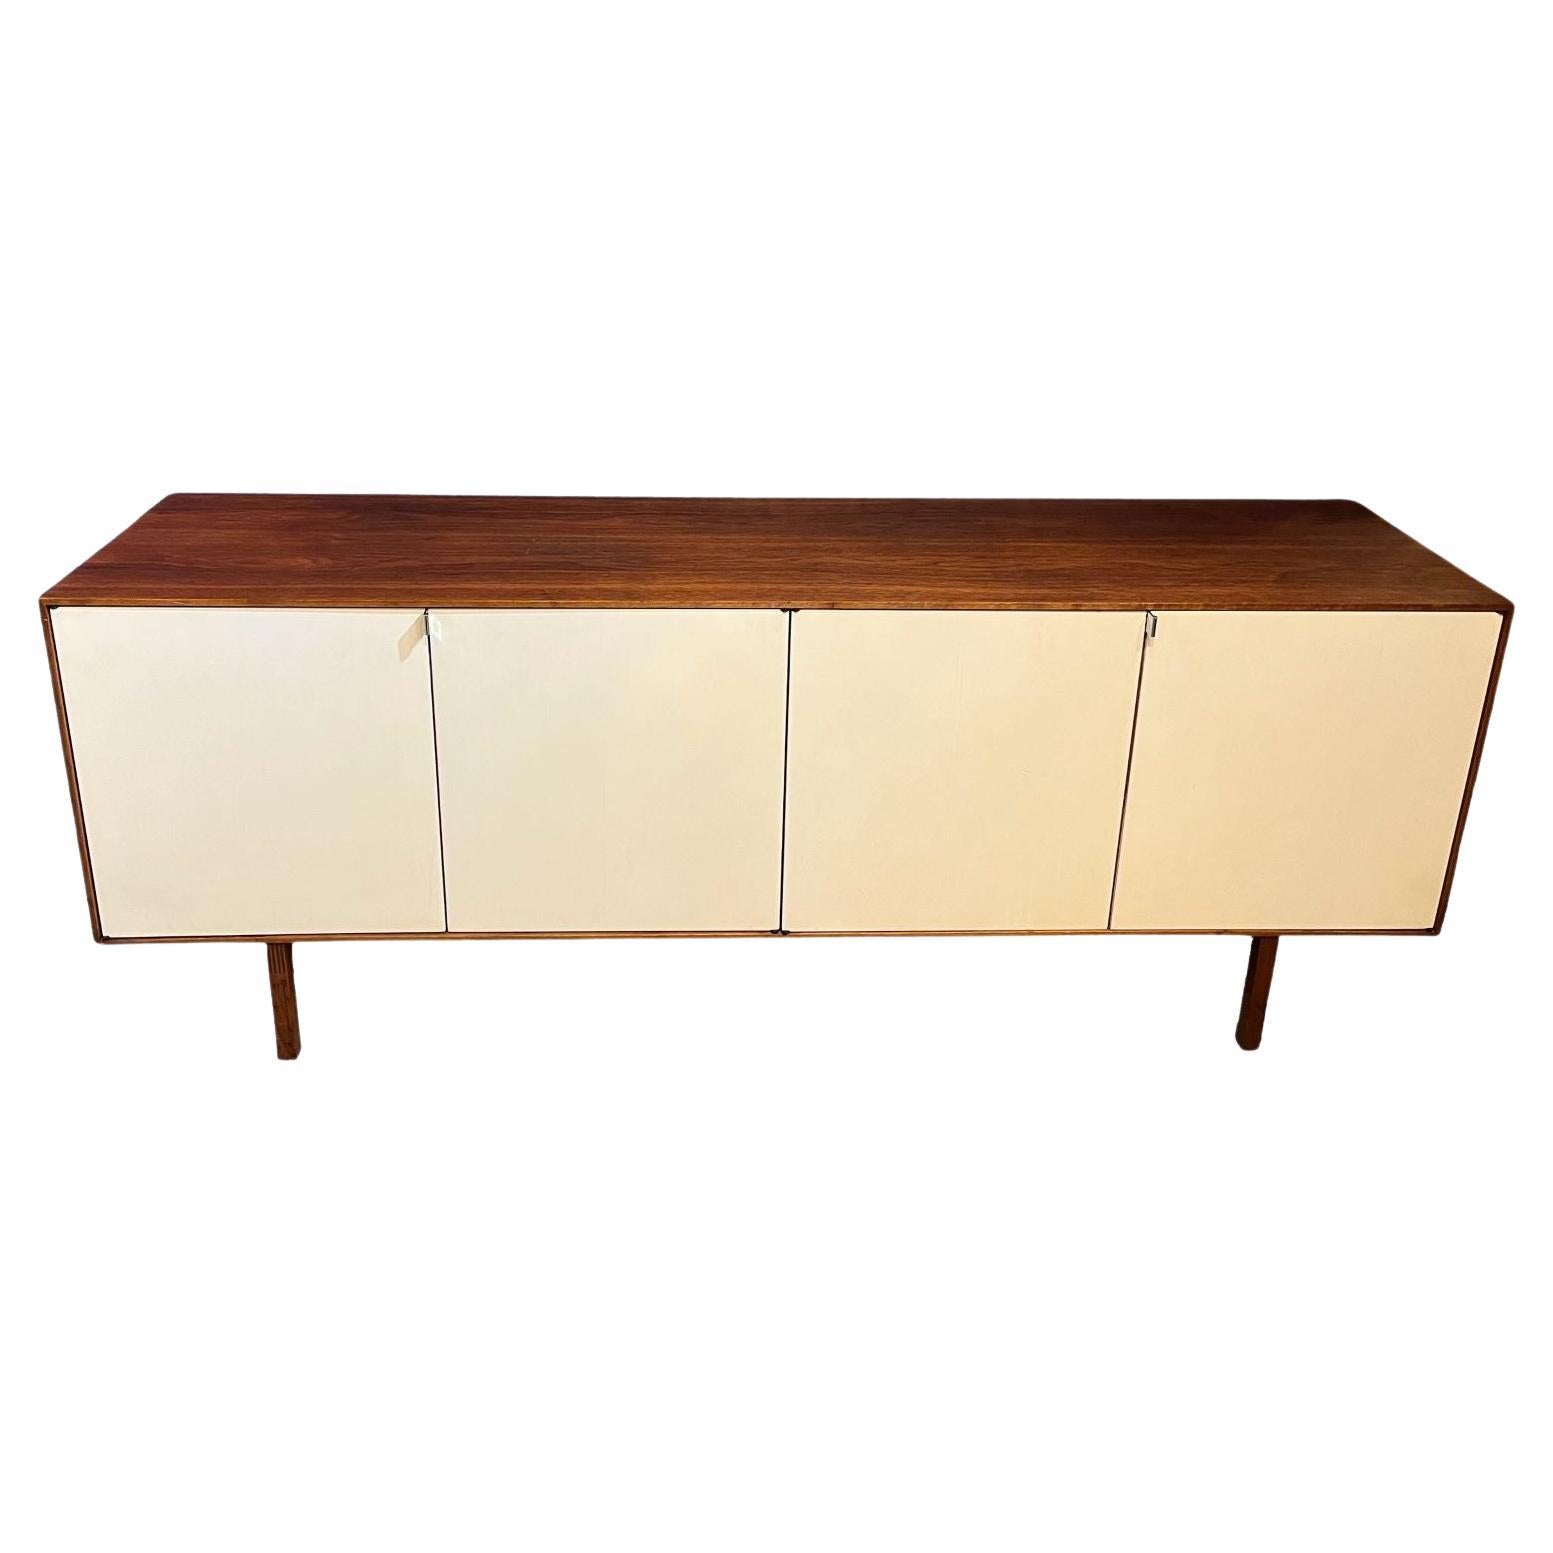 Early Florence Knoll For Knoll Associates Walnut And Cream Credenza C.1950